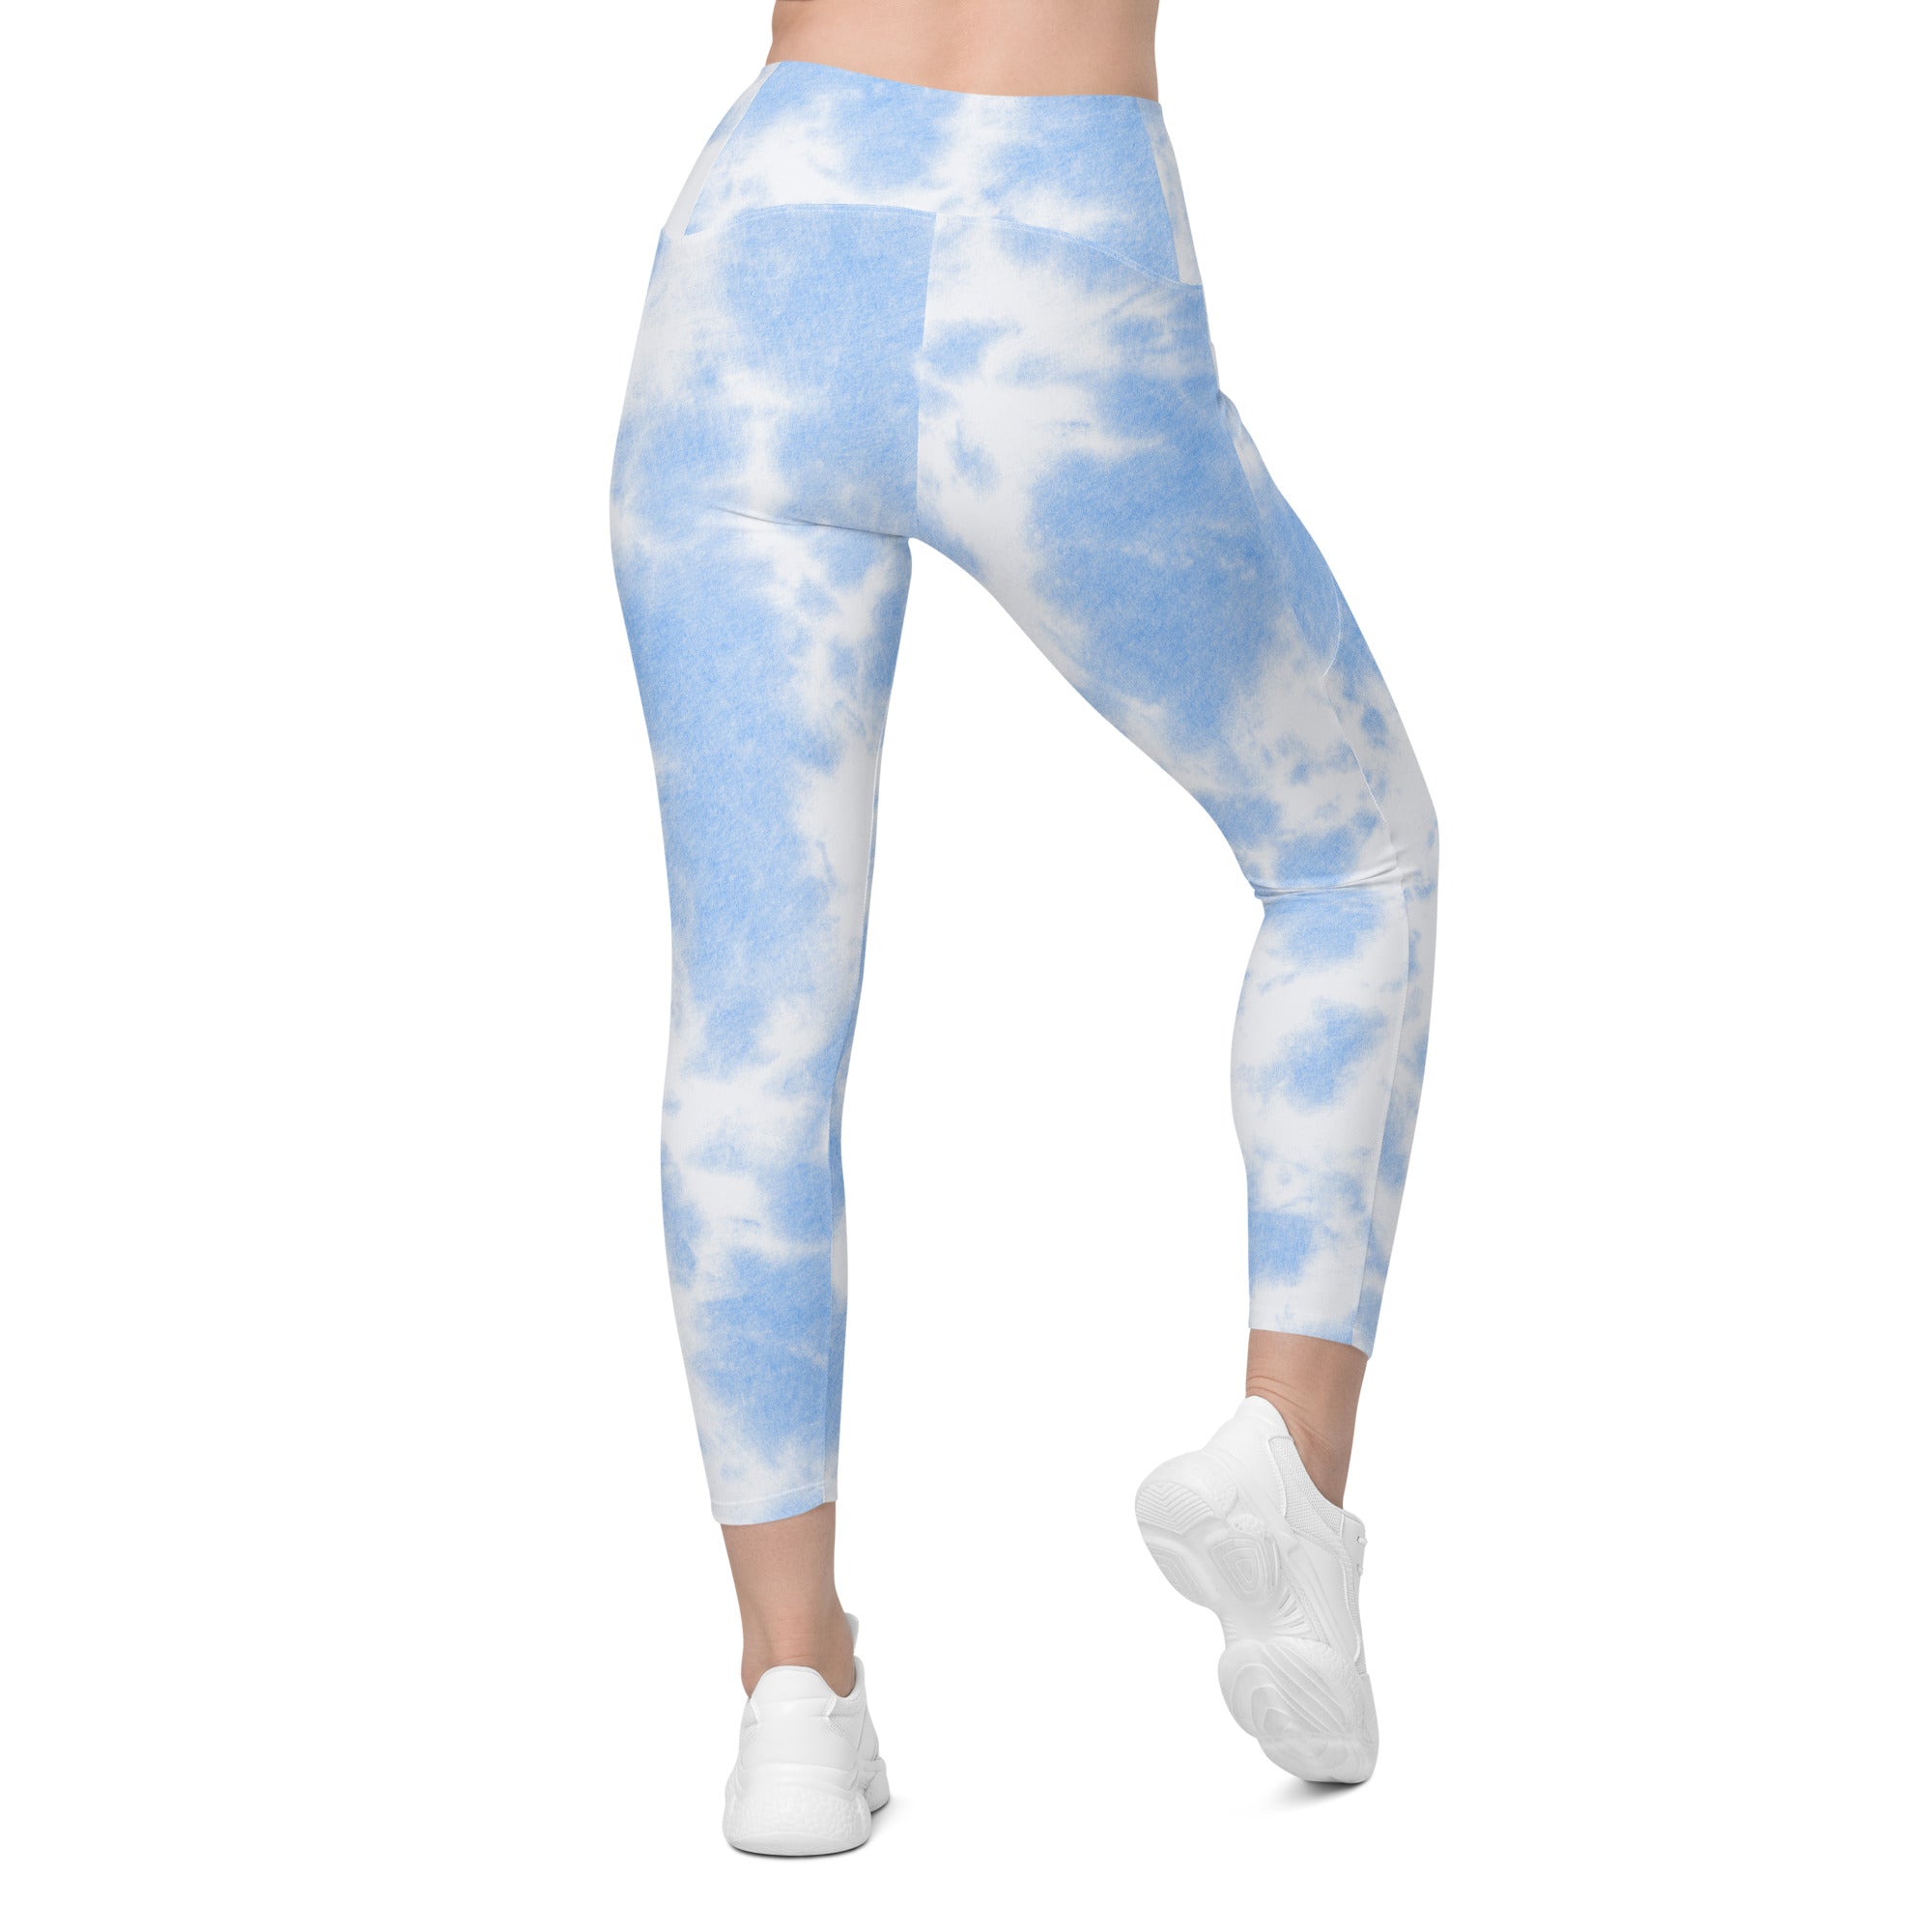 Just Dropped! Chakra 5 Leggings with pockets